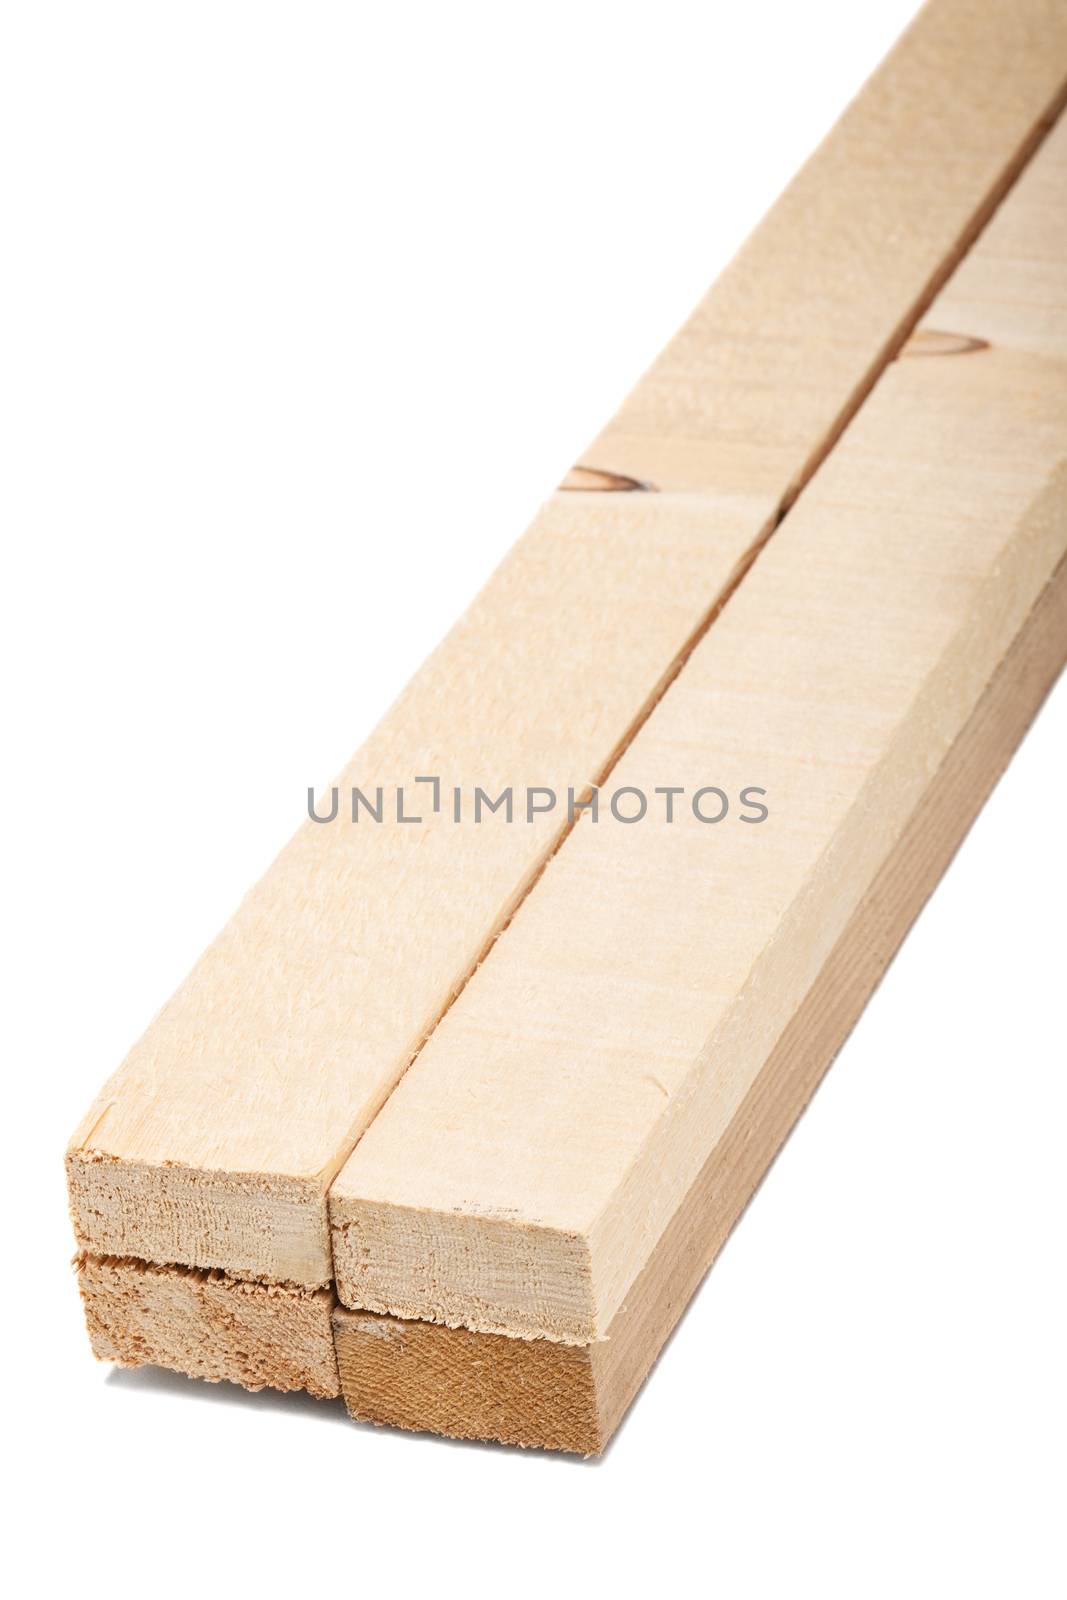 four wooden beams isolated on white background